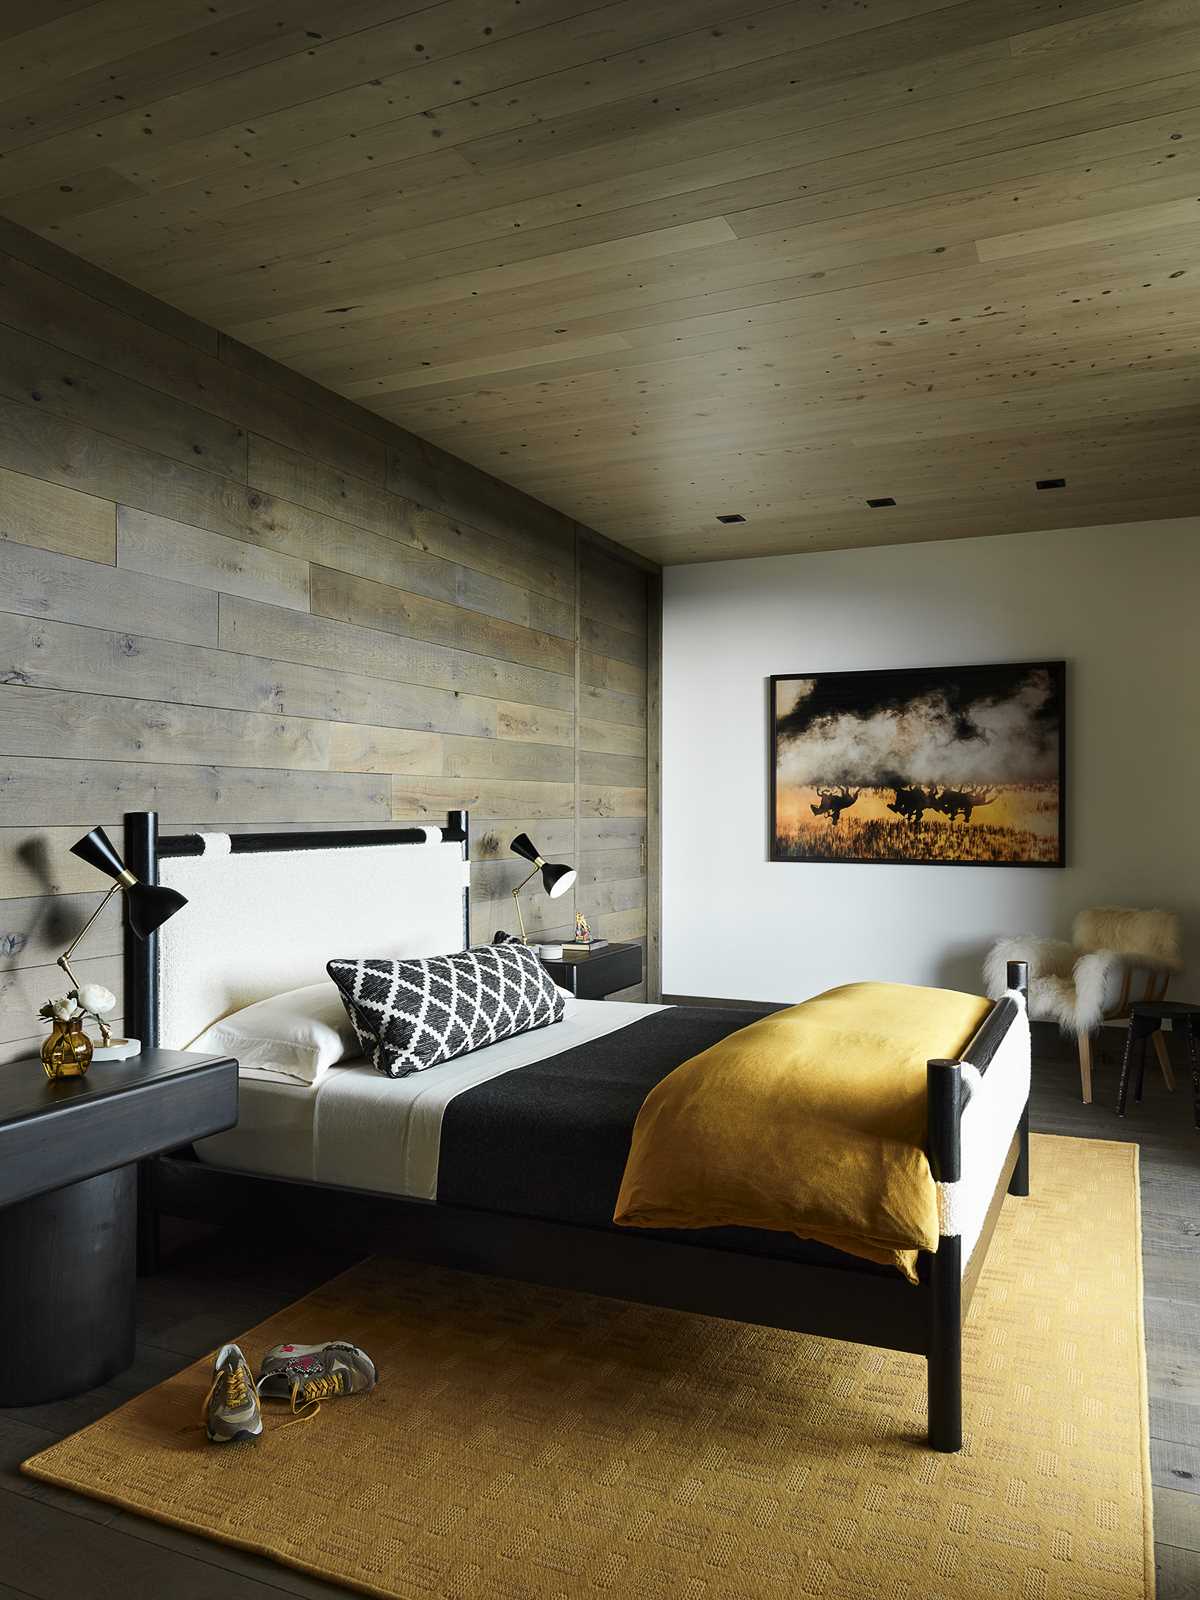 A modern bedroom with wood accent wall and black furniture.